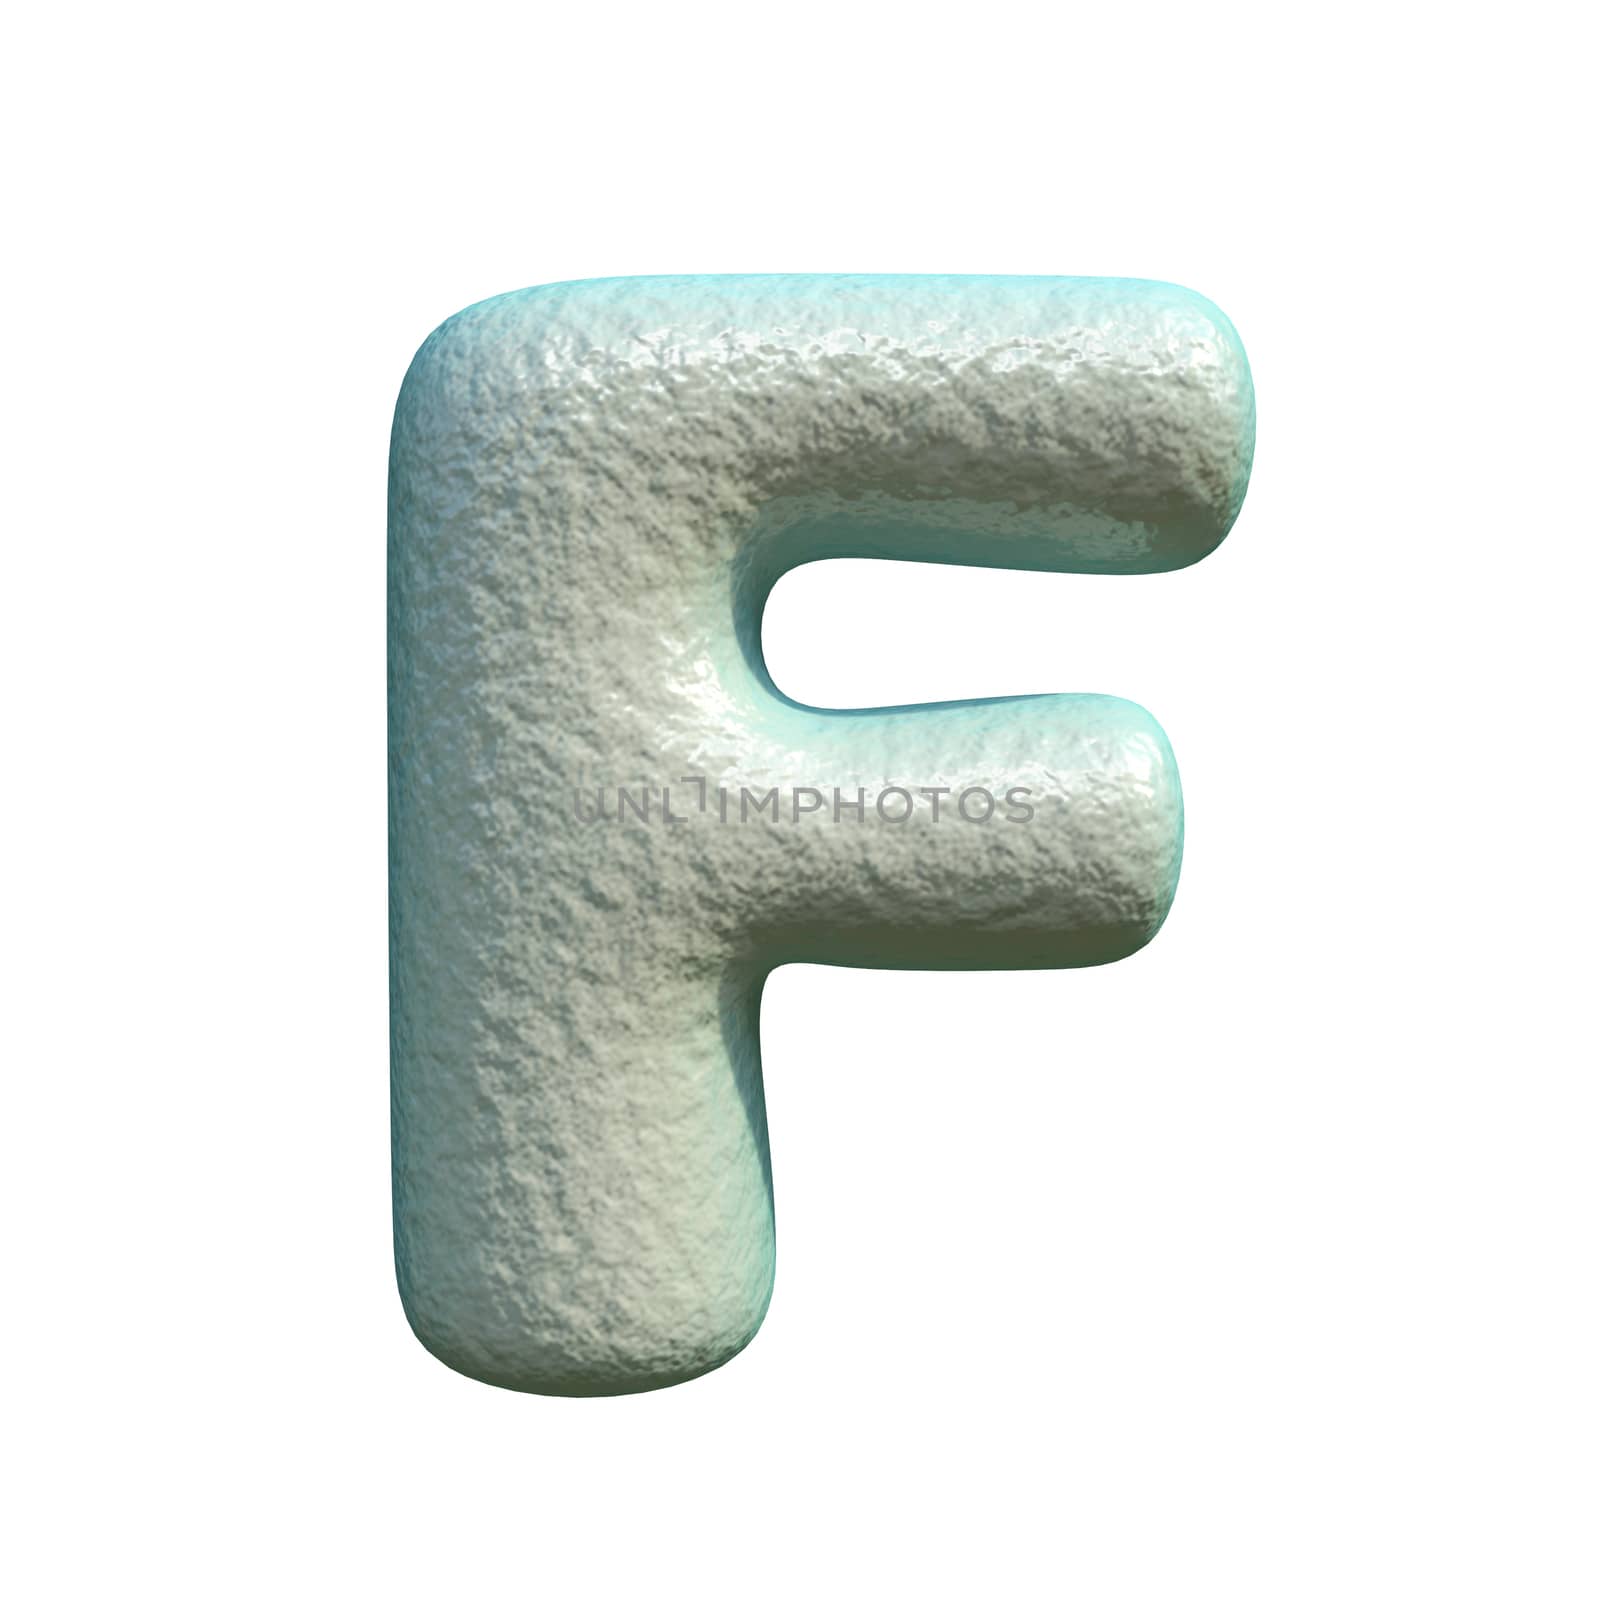 Grey blue clay font Letter F 3D rendering illustration isolated on white background